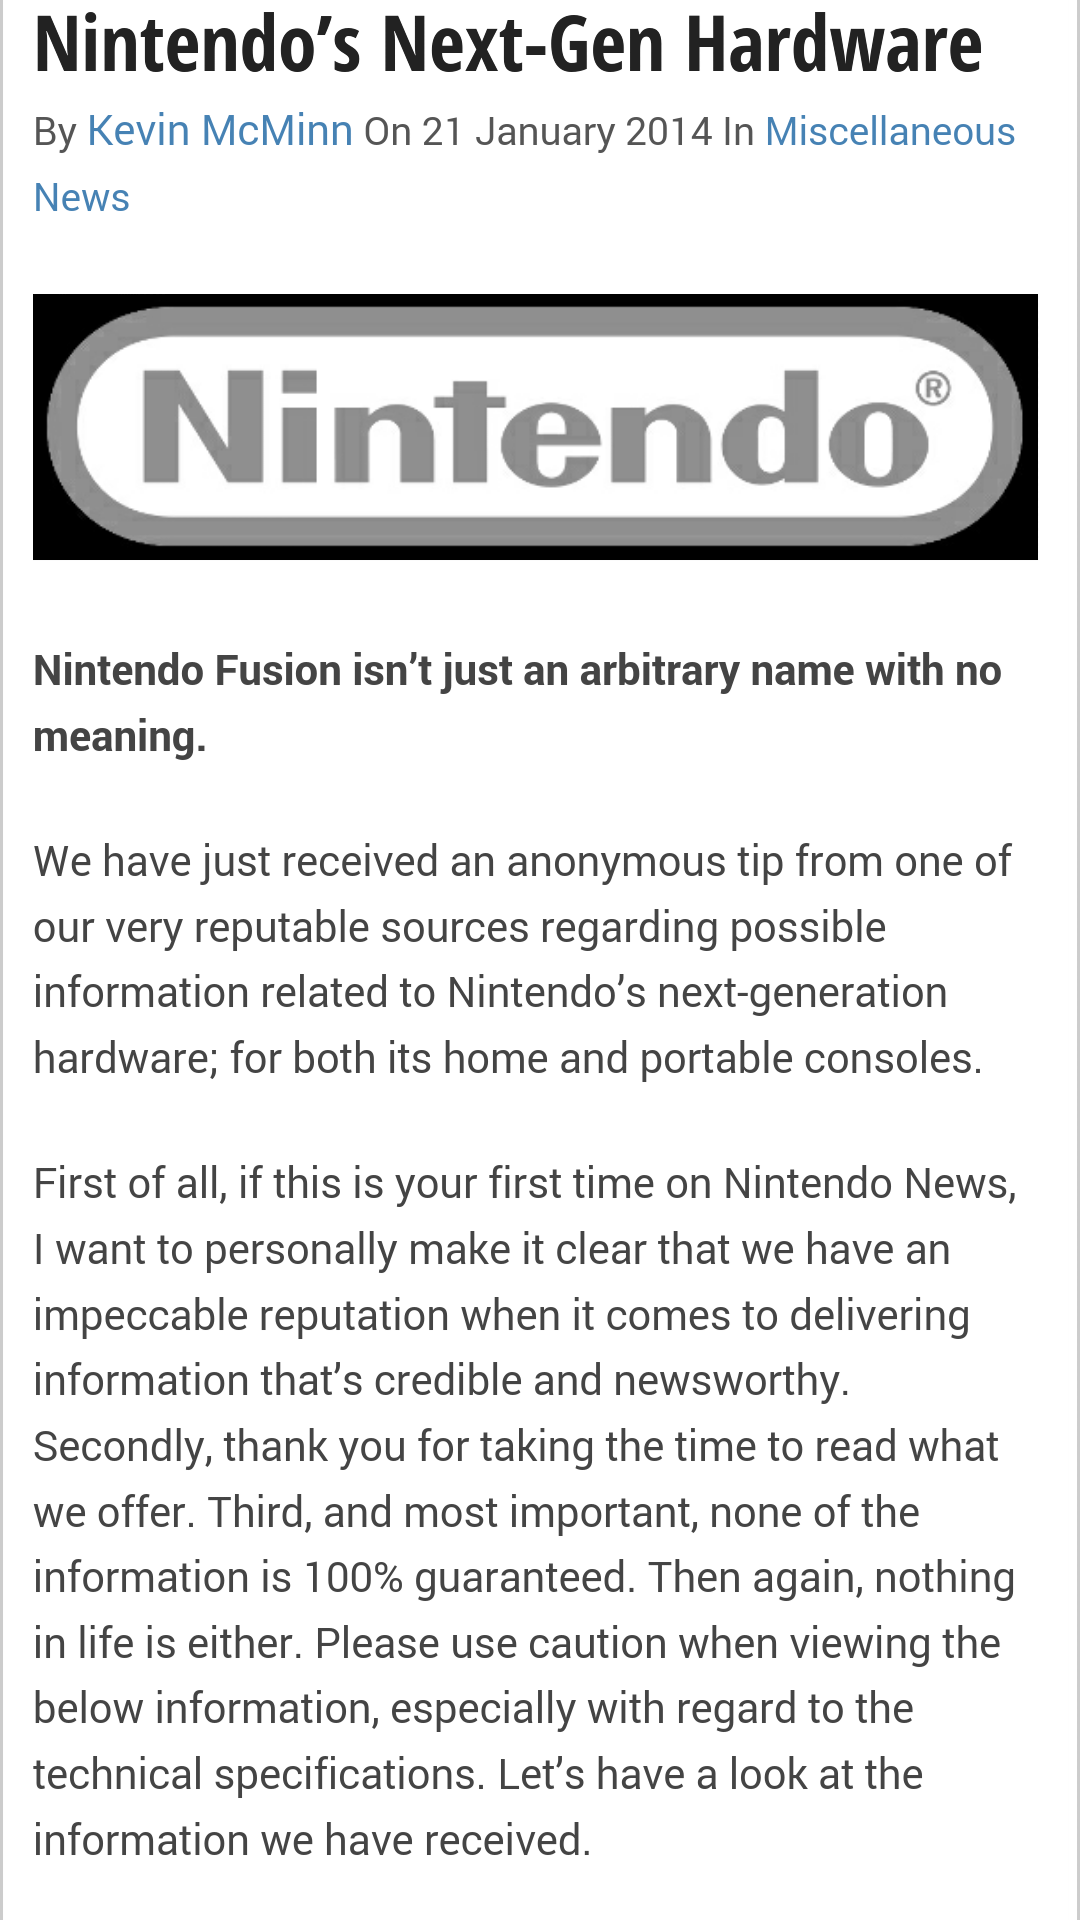 In other leaked News: Nintendo will release a console with better specs than next gen